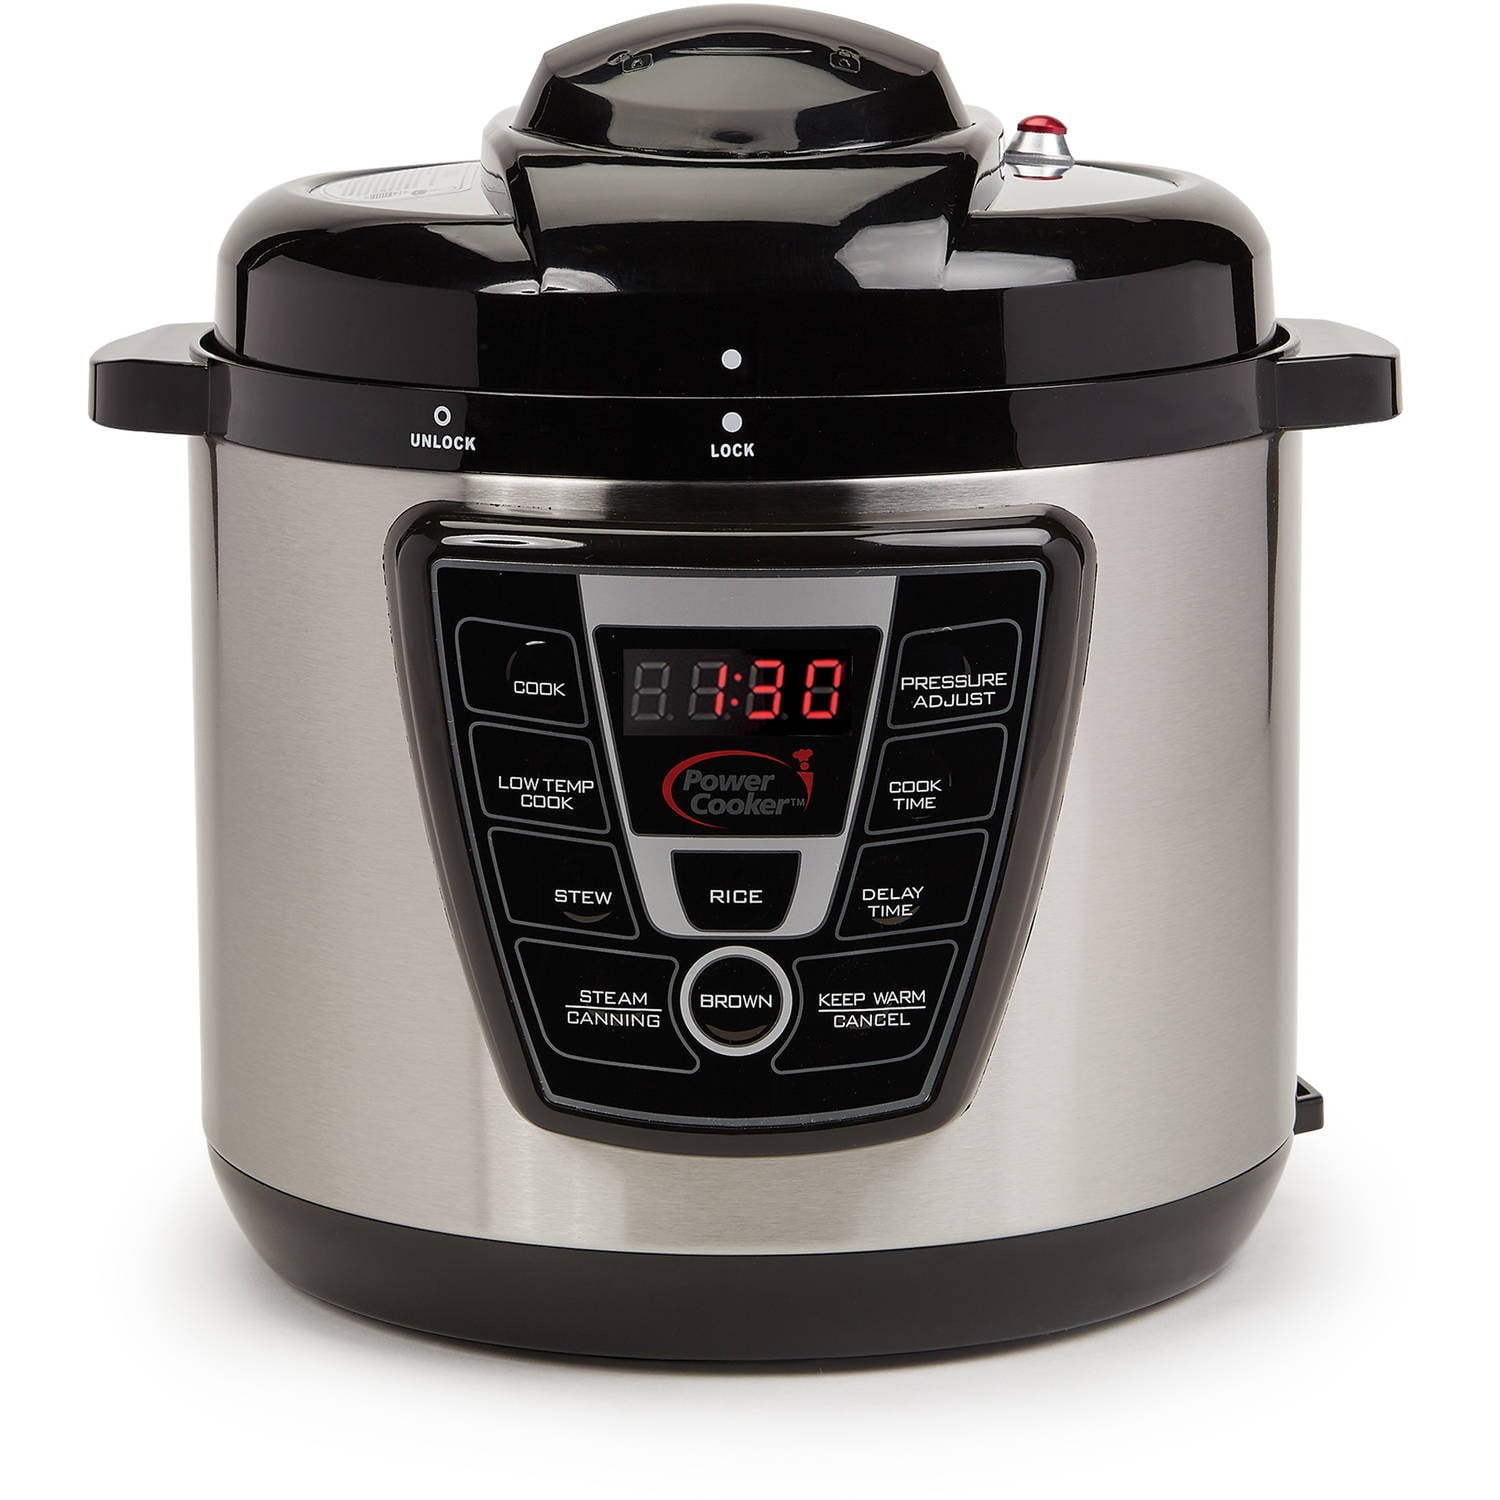 Pressure cookers steam фото 92